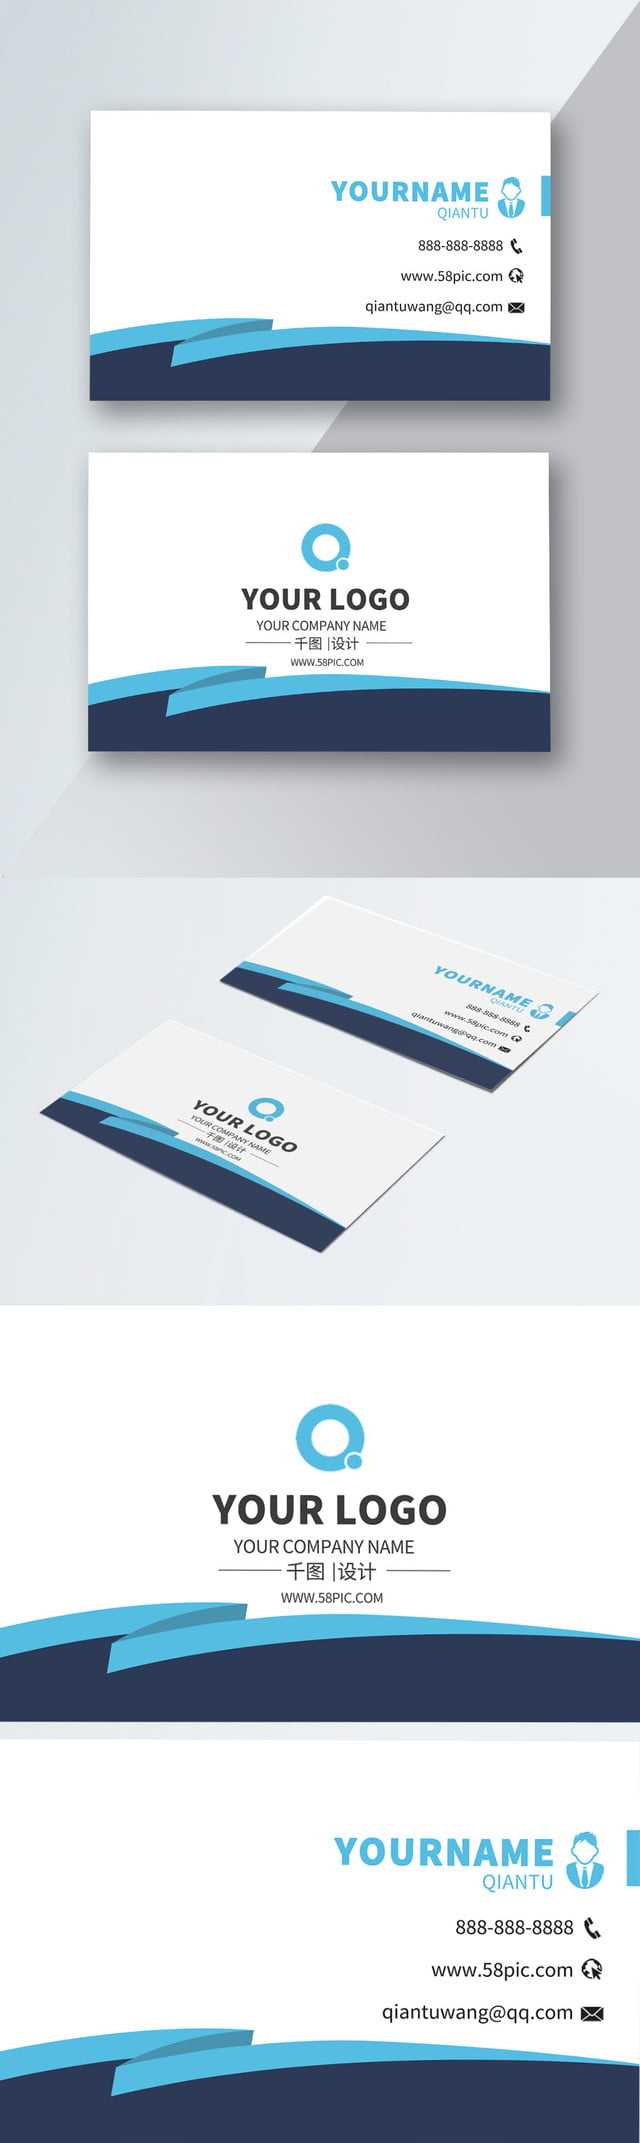 Advertising Company Business Card Material Download Intended For Company Business Cards Templates